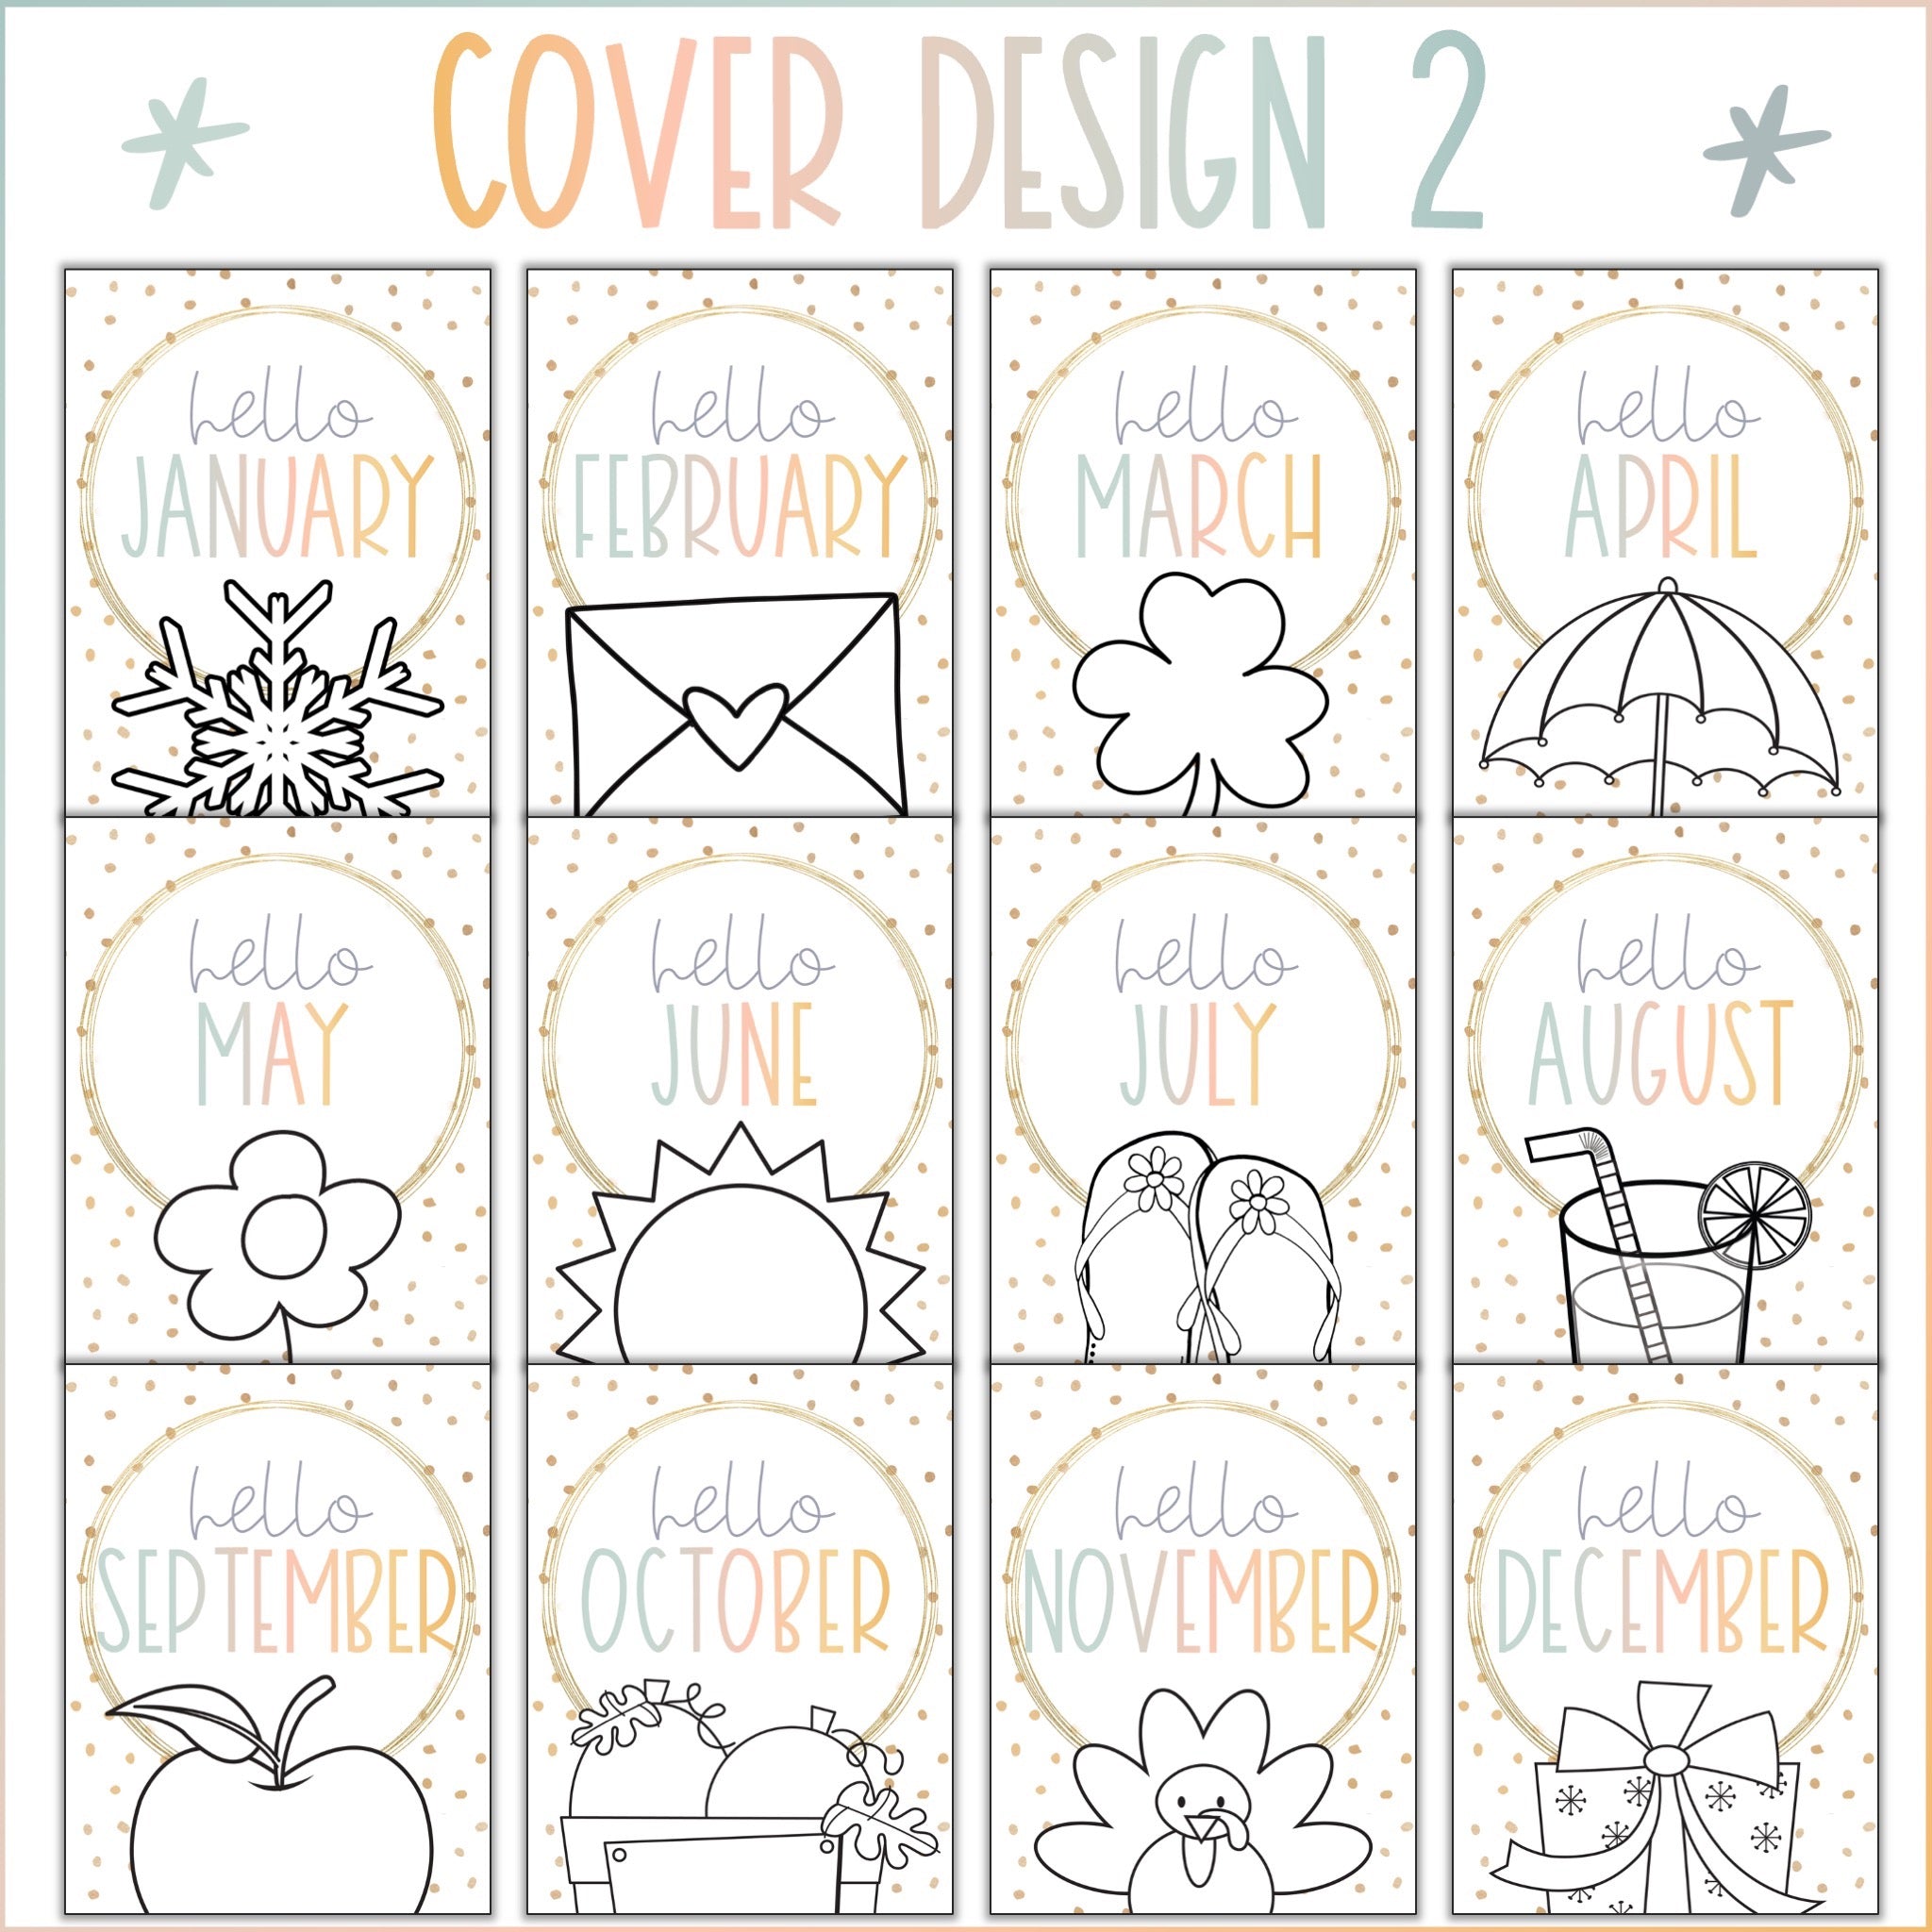 Hello Calm Monthly Binder Covers